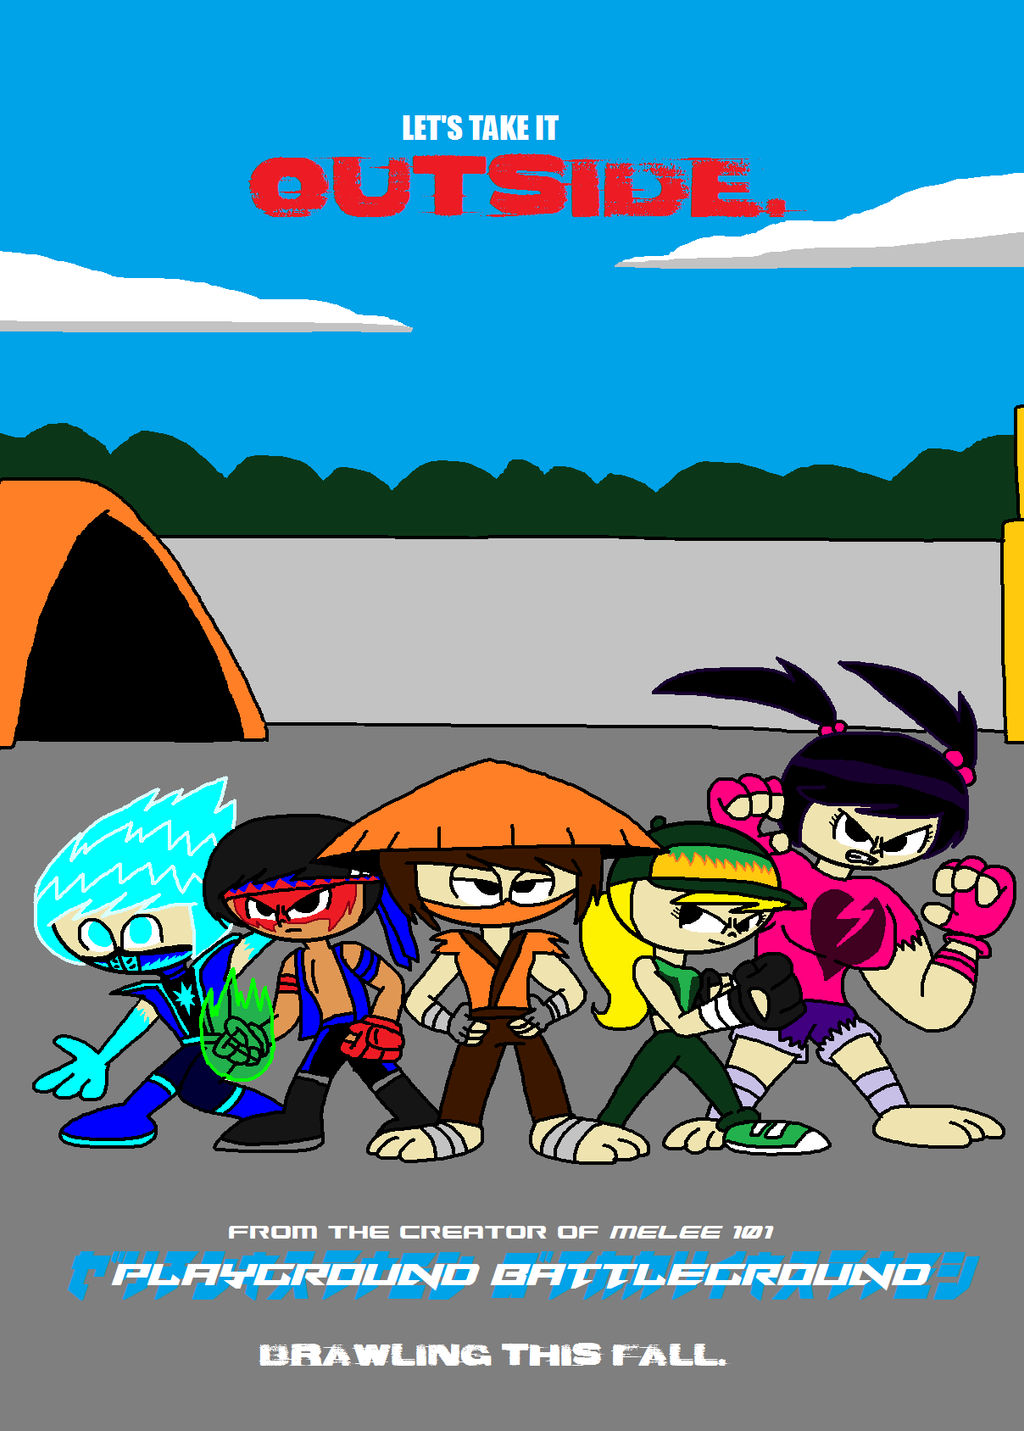 The Toon Bully remake poster by Dimensions101 on DeviantArt